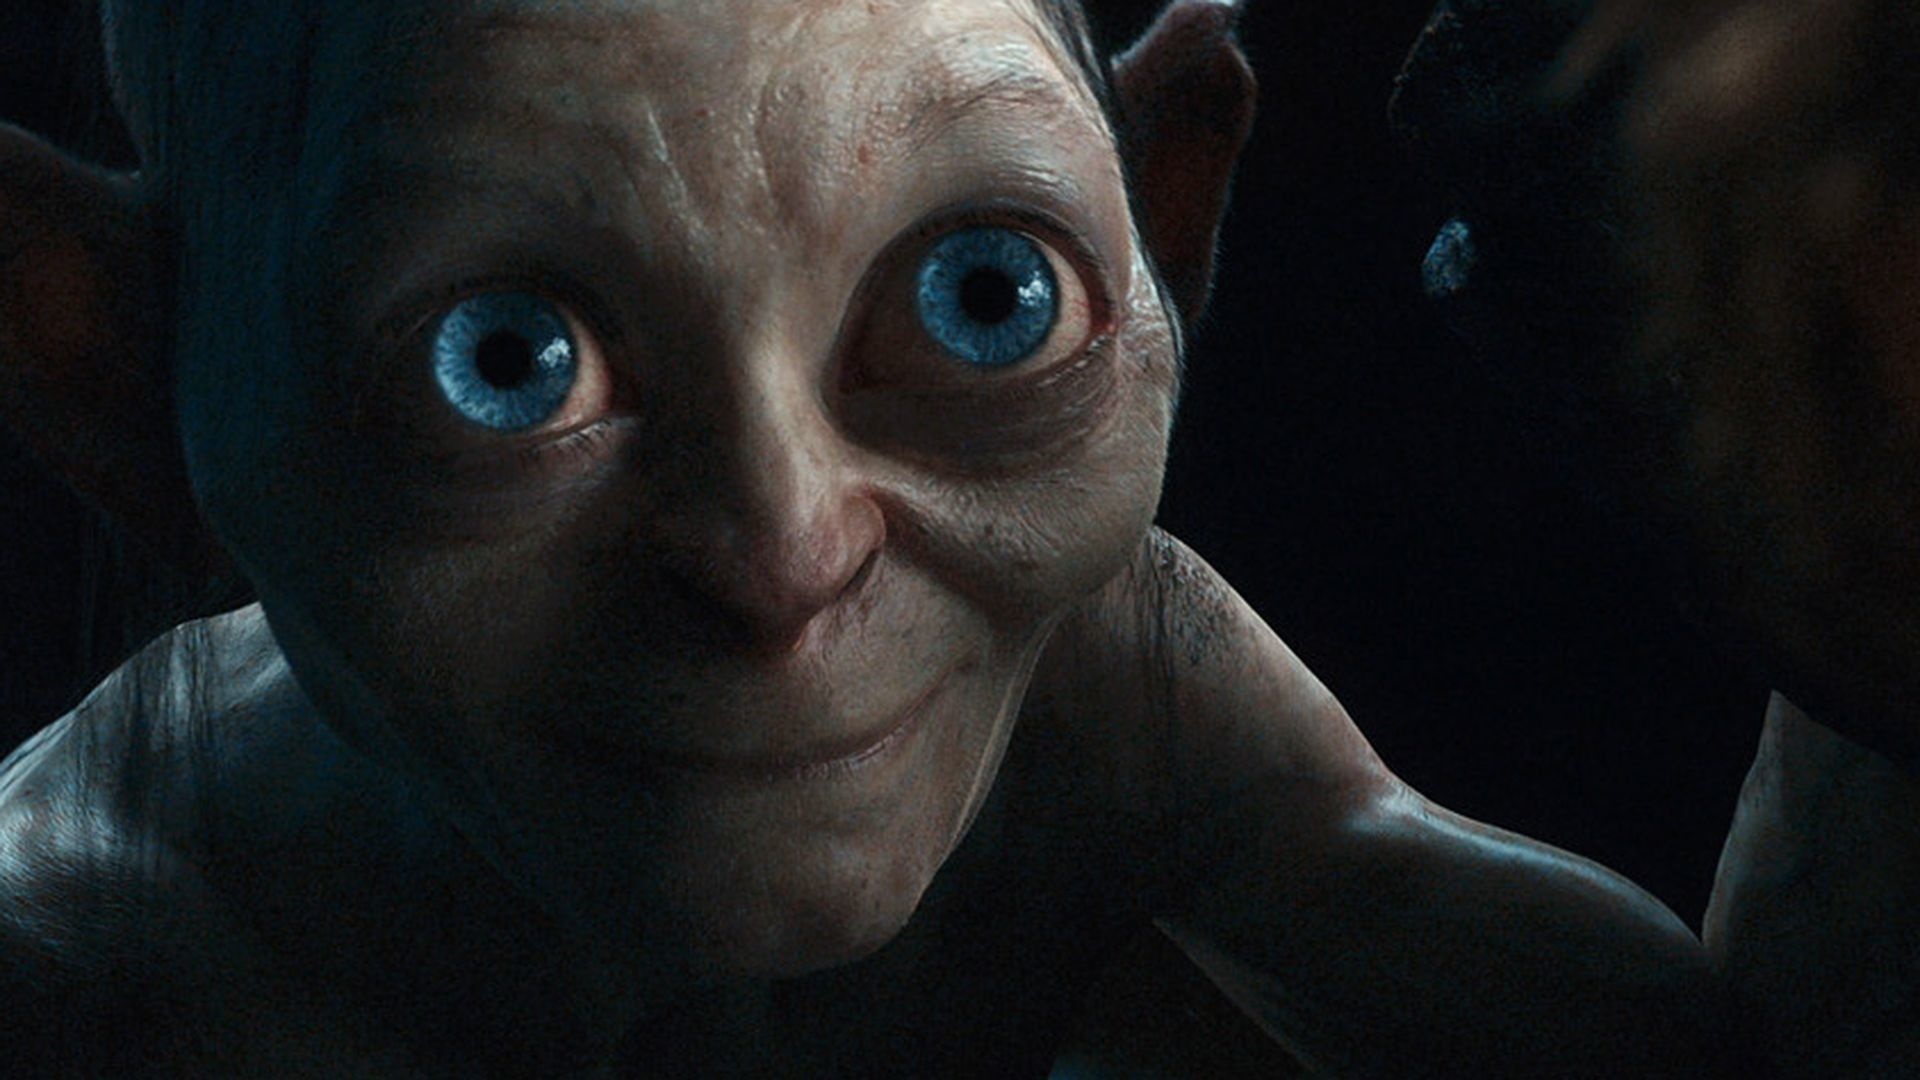 Smeagol, Lord of the Rings, High-resolution wallpapers, Free download, 1920x1080 Full HD Desktop